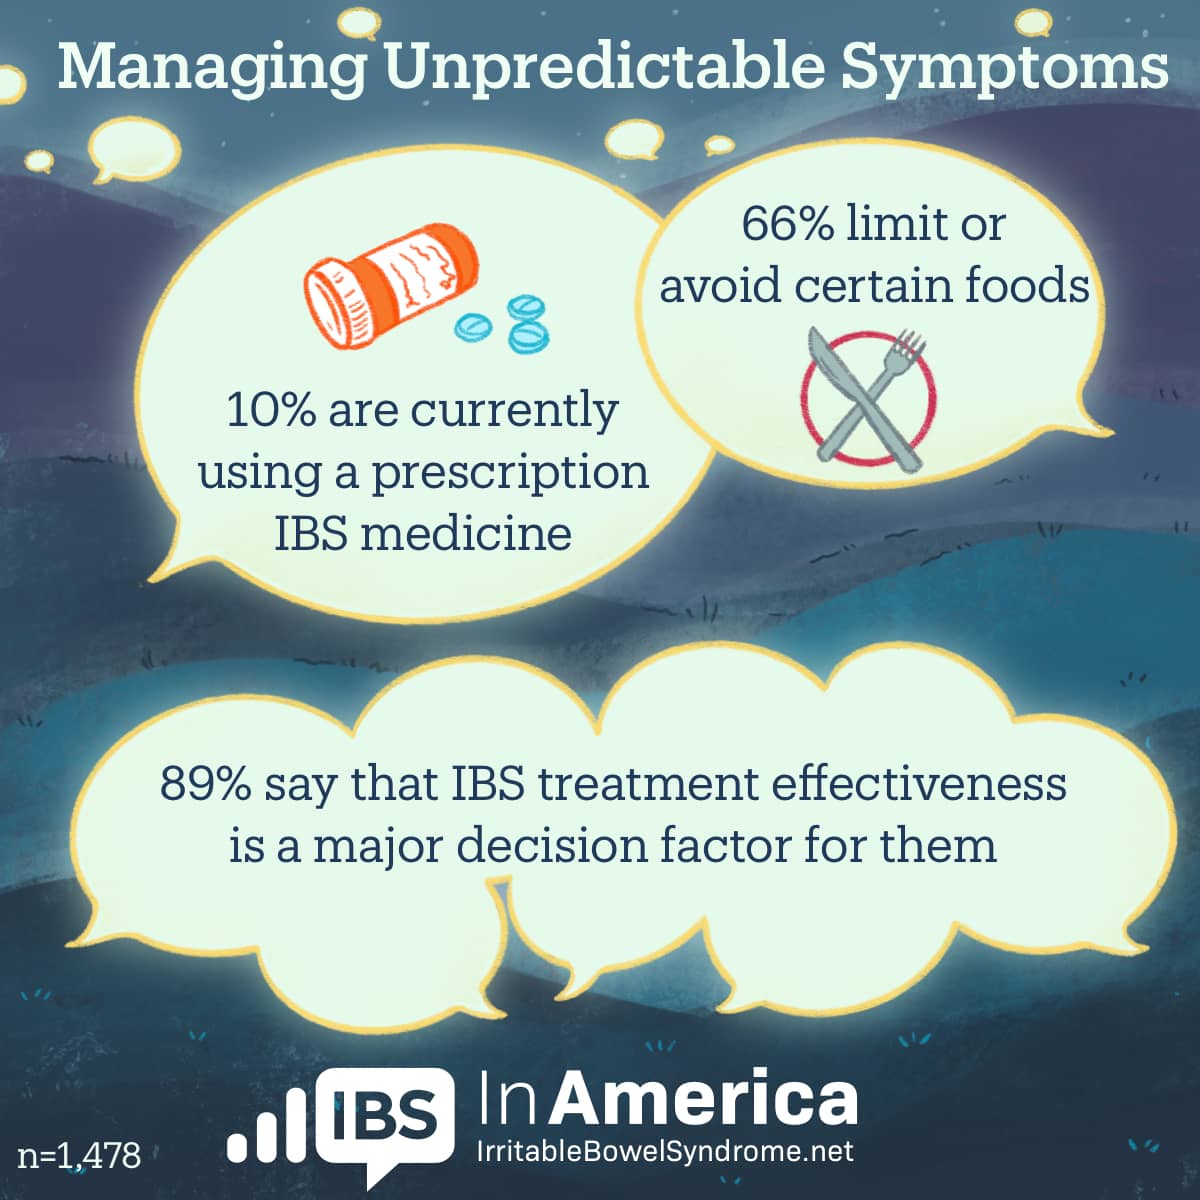 Three different speech bubbles include information about using IBS prescription medicine, limiting or avoiding certain foods, and treatment effectiveness.